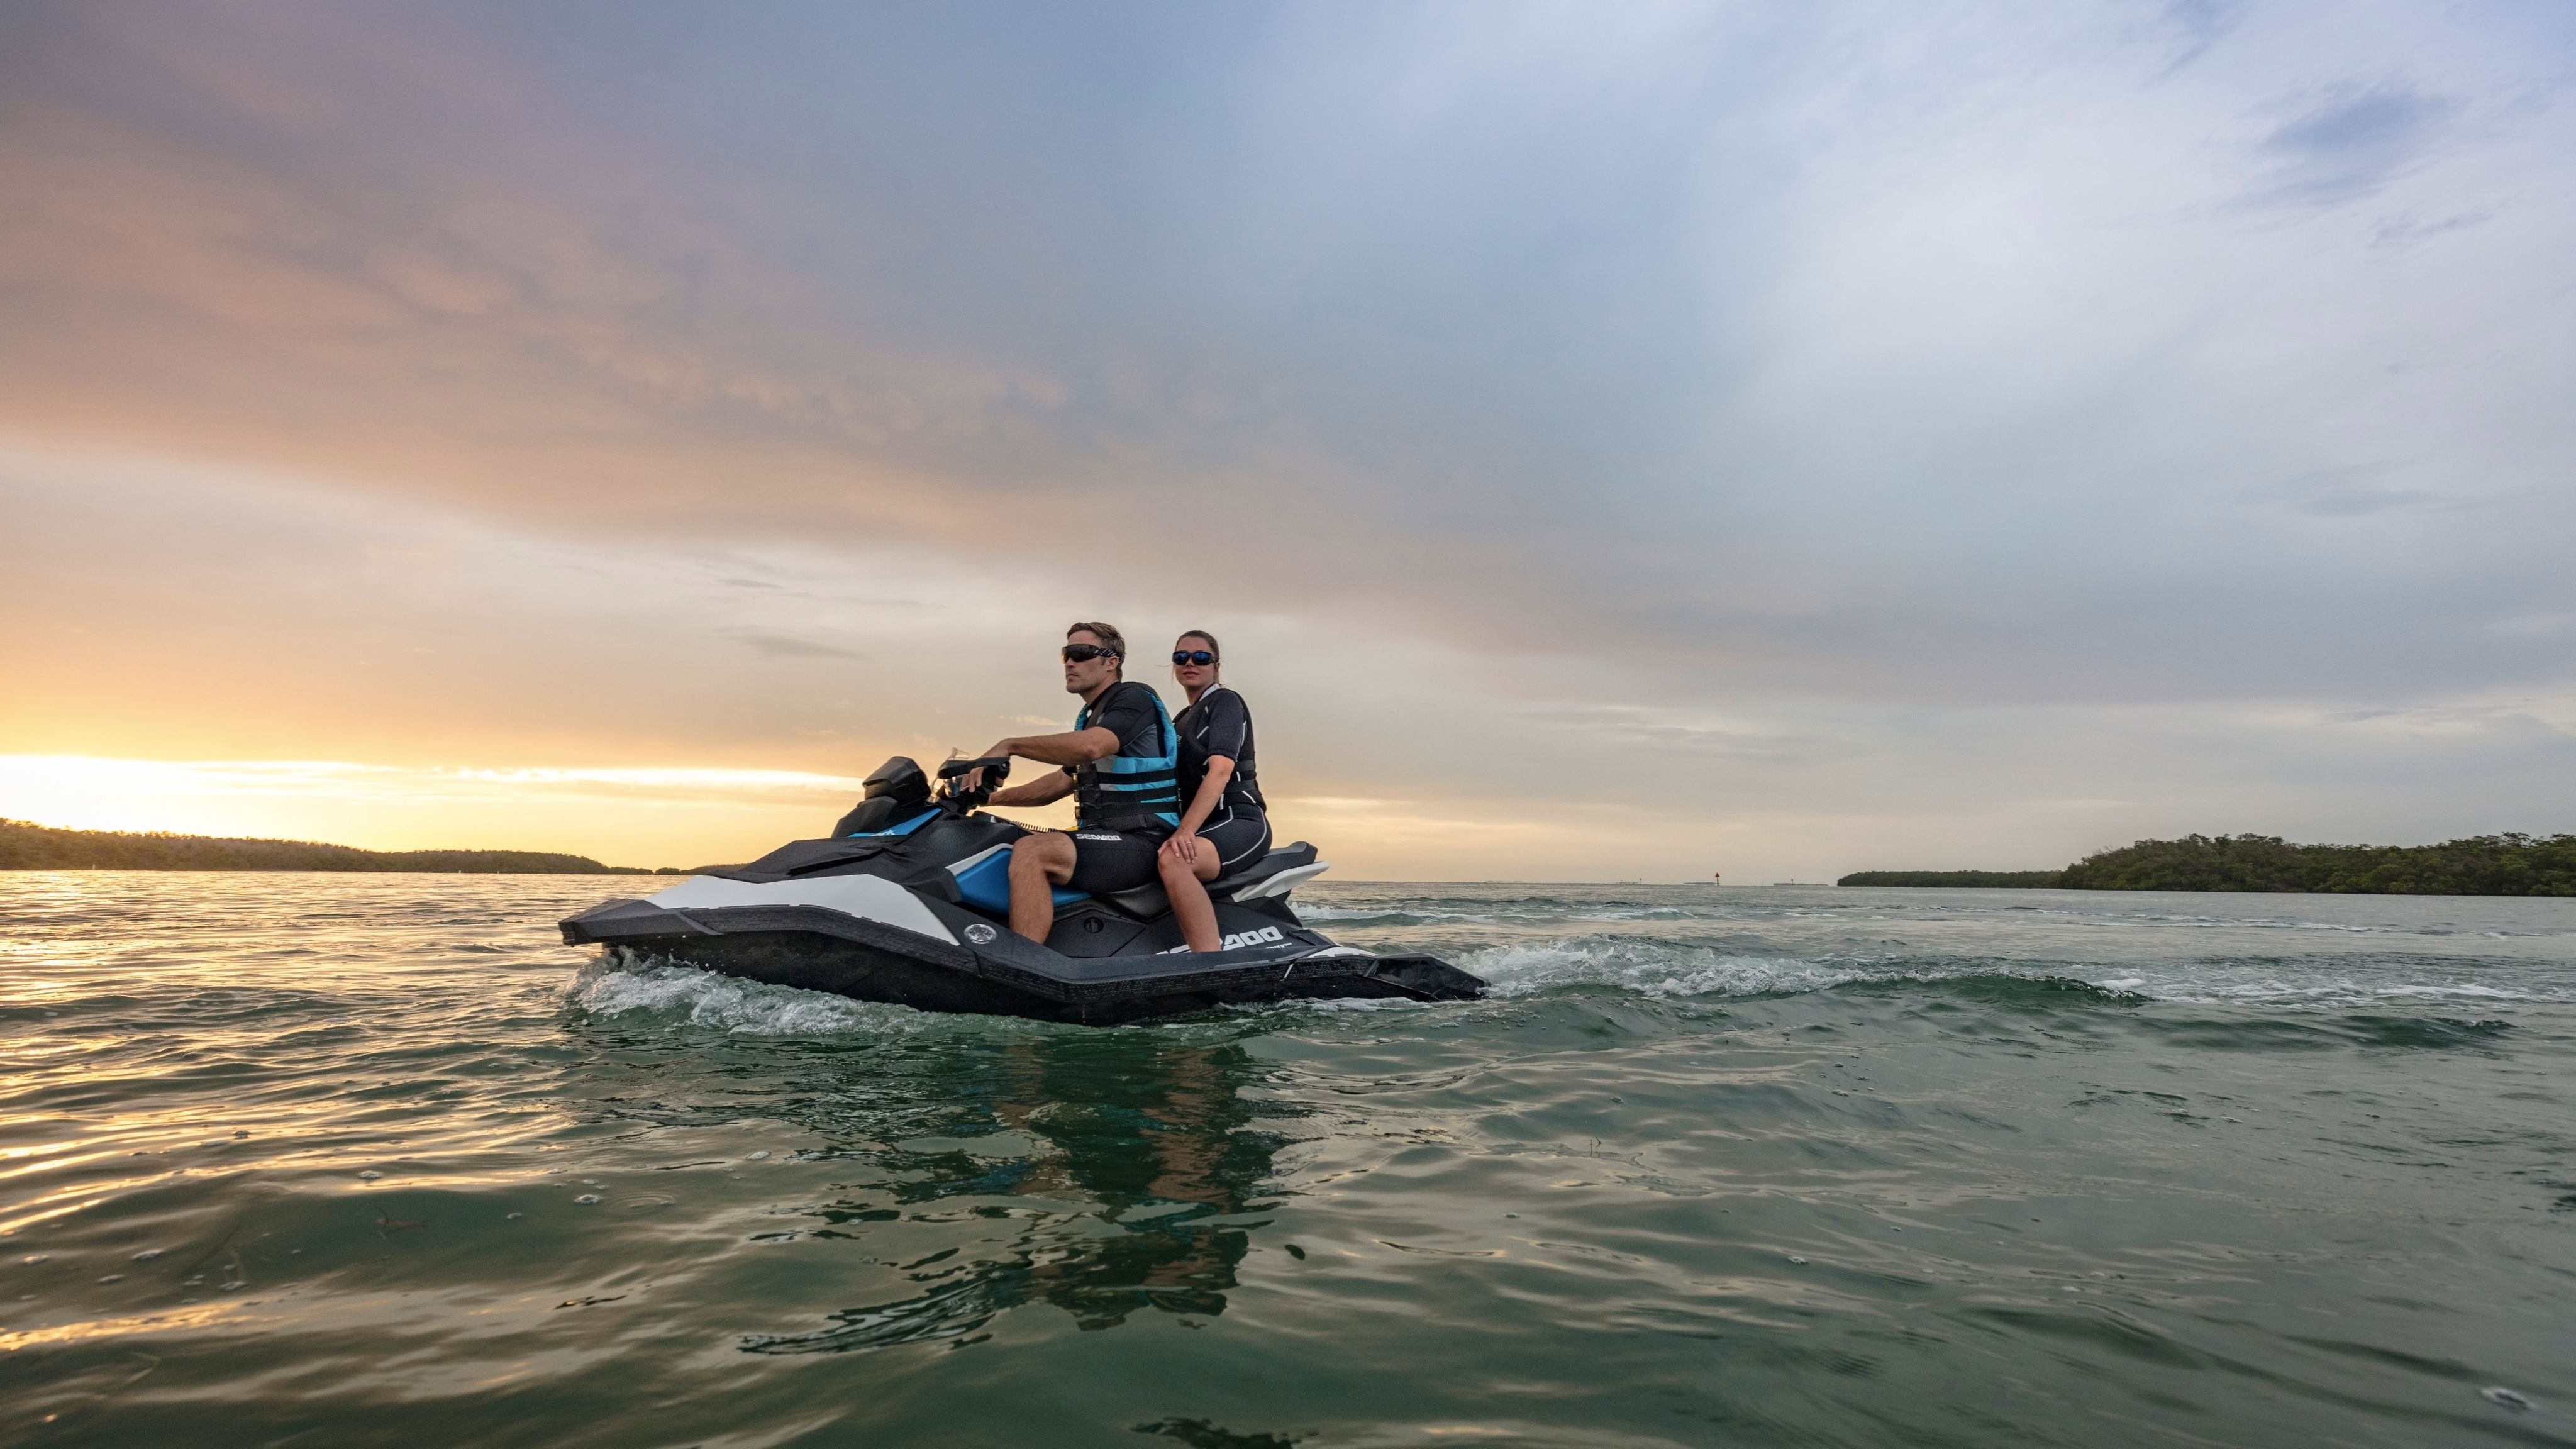 Man and women on a Sea-Doo